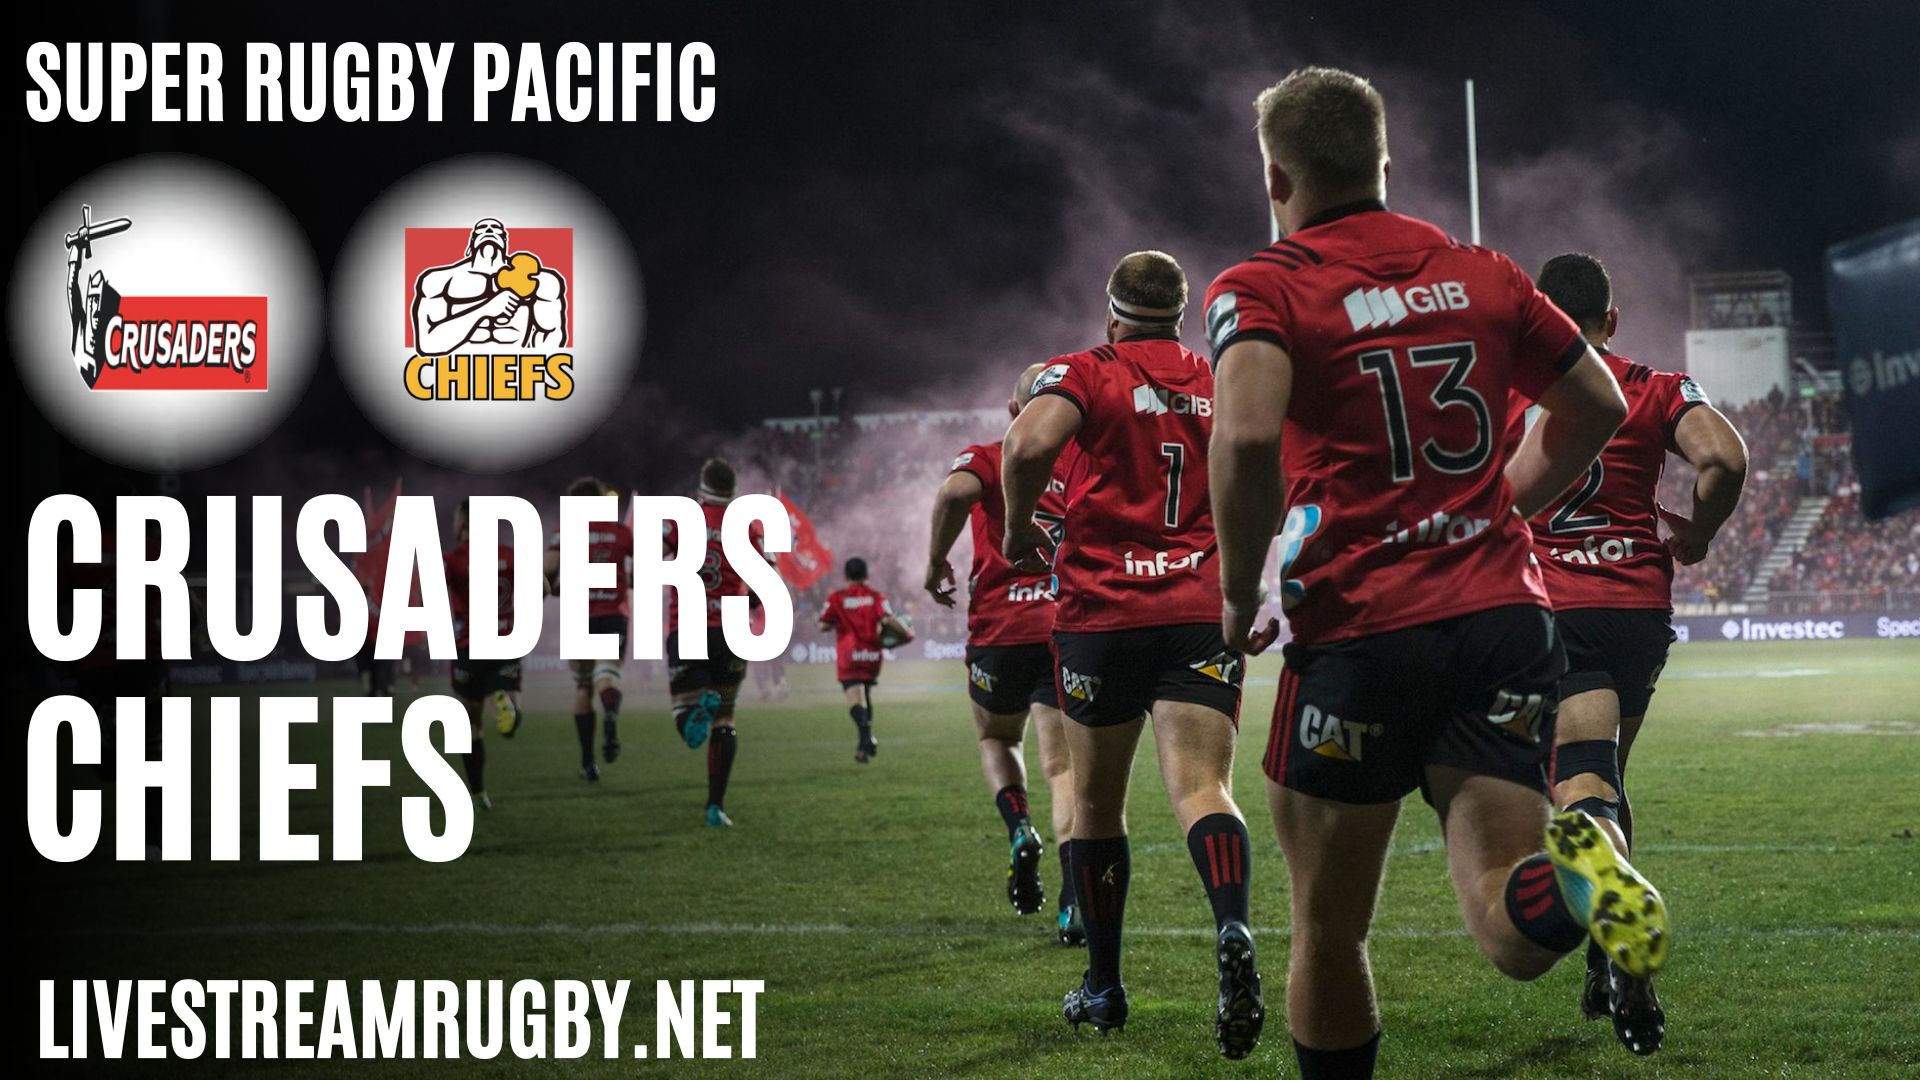 Crusaders Vs Chiefs Live Stream Super Rugby Pacific